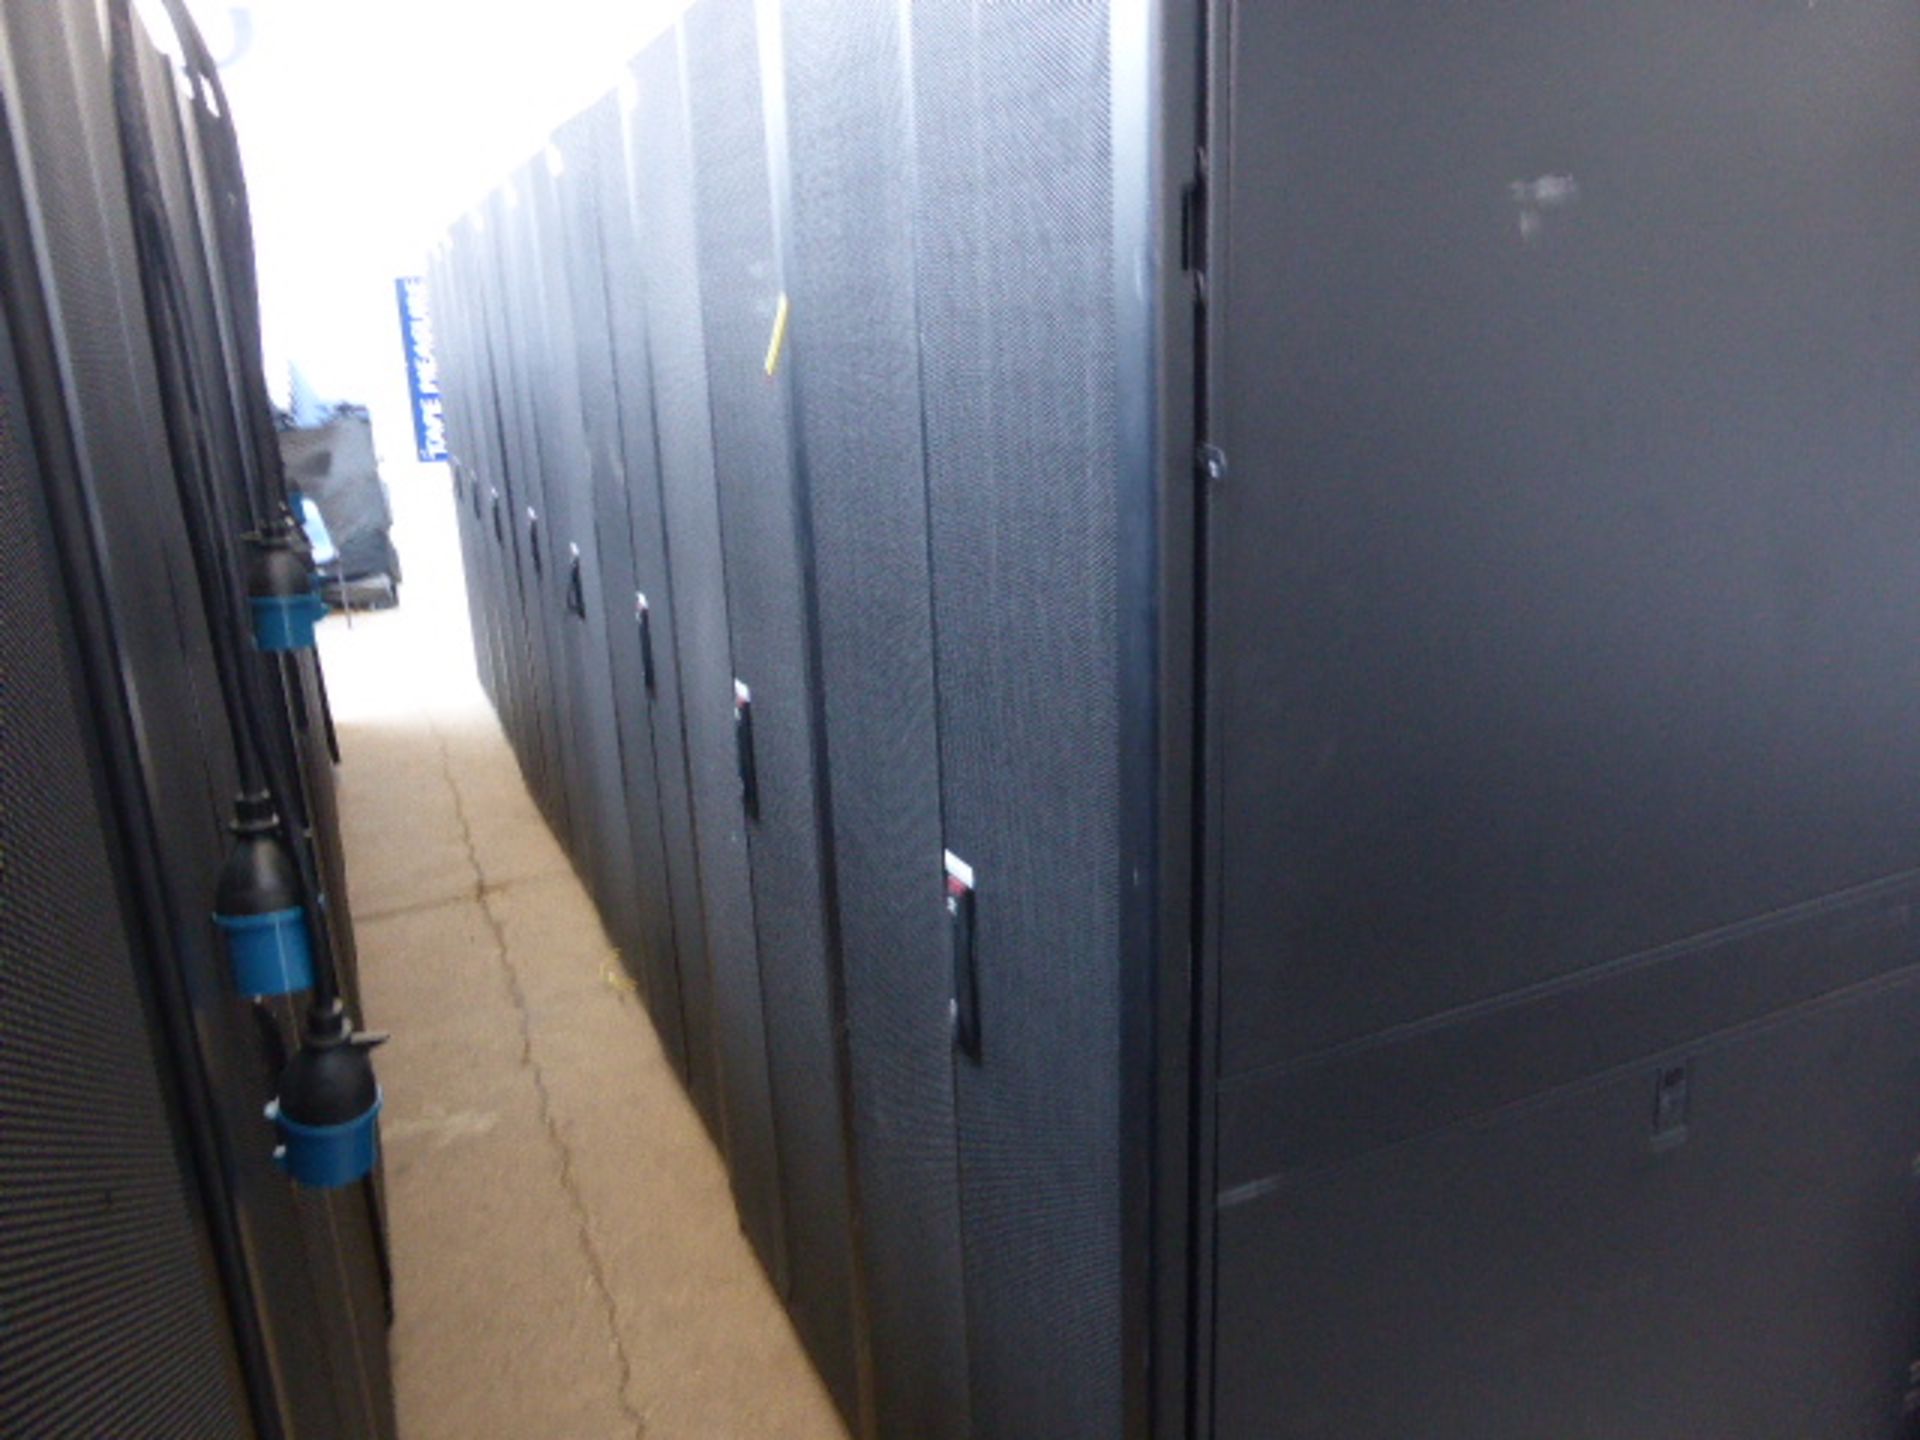 APC server cabinet on castors 75cm wide with 2 APC switch rack PDU units each with 24 outputs on - Image 3 of 3